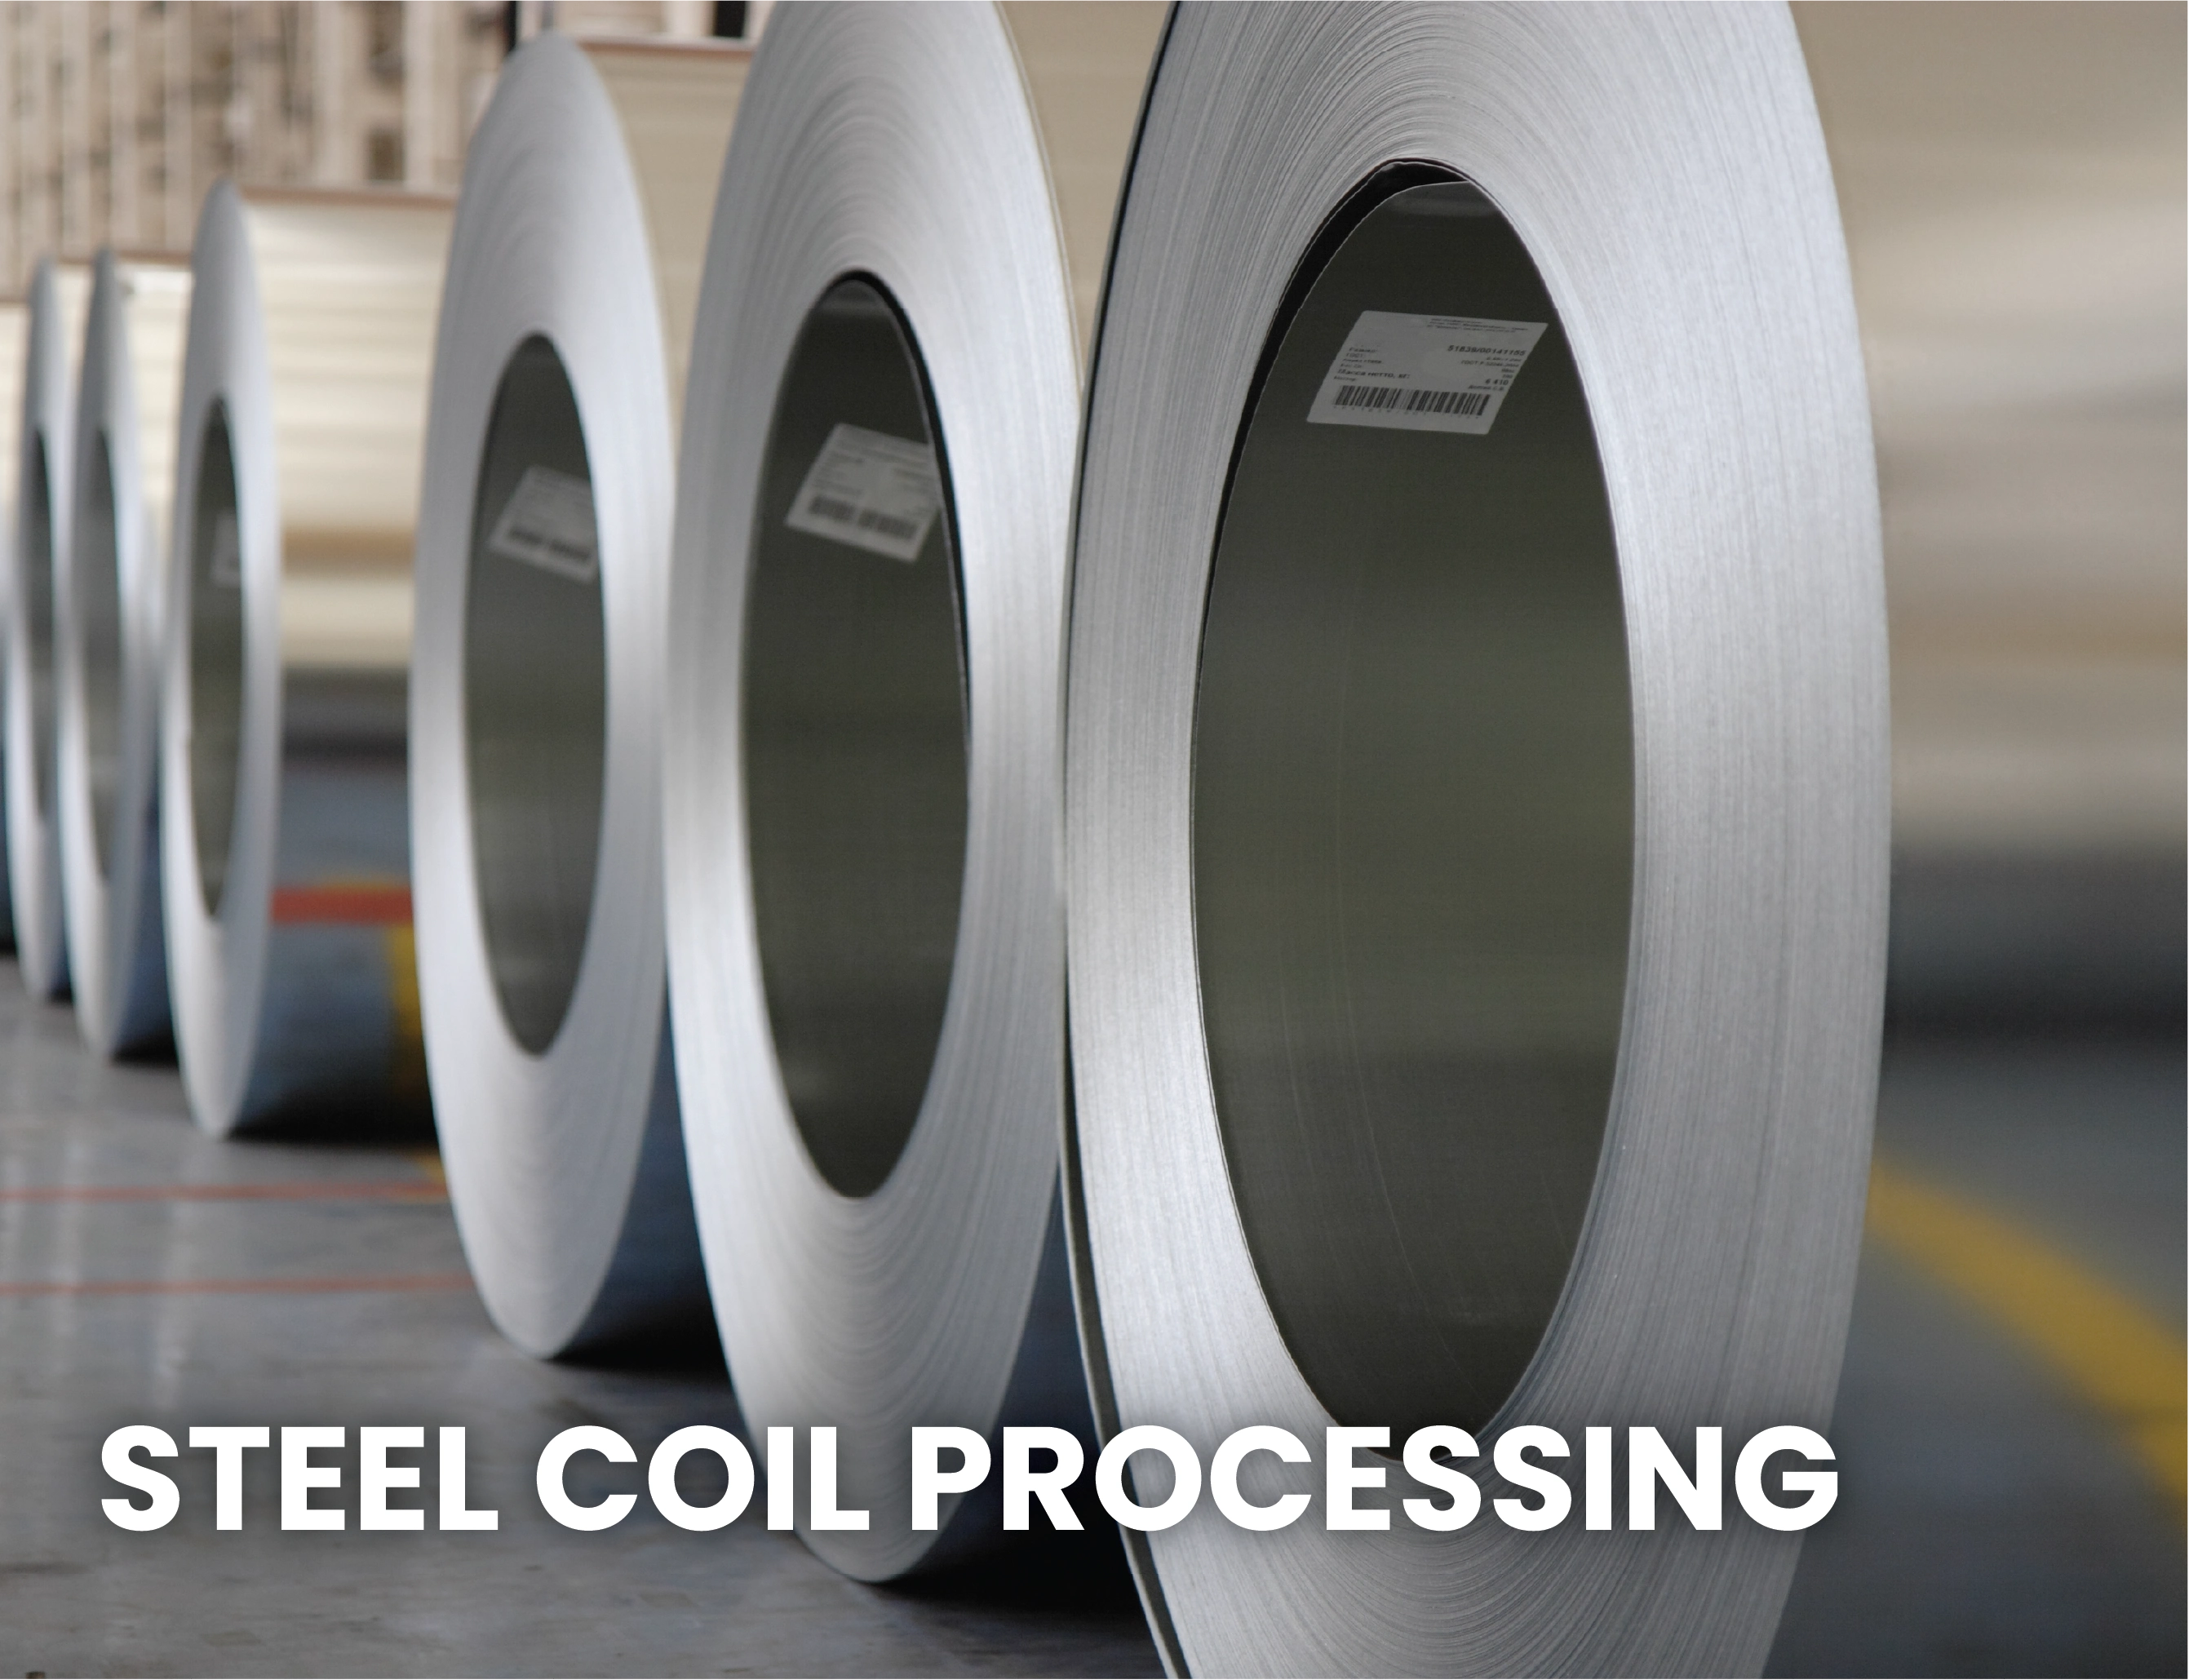 STEEL COIL PROCESSING